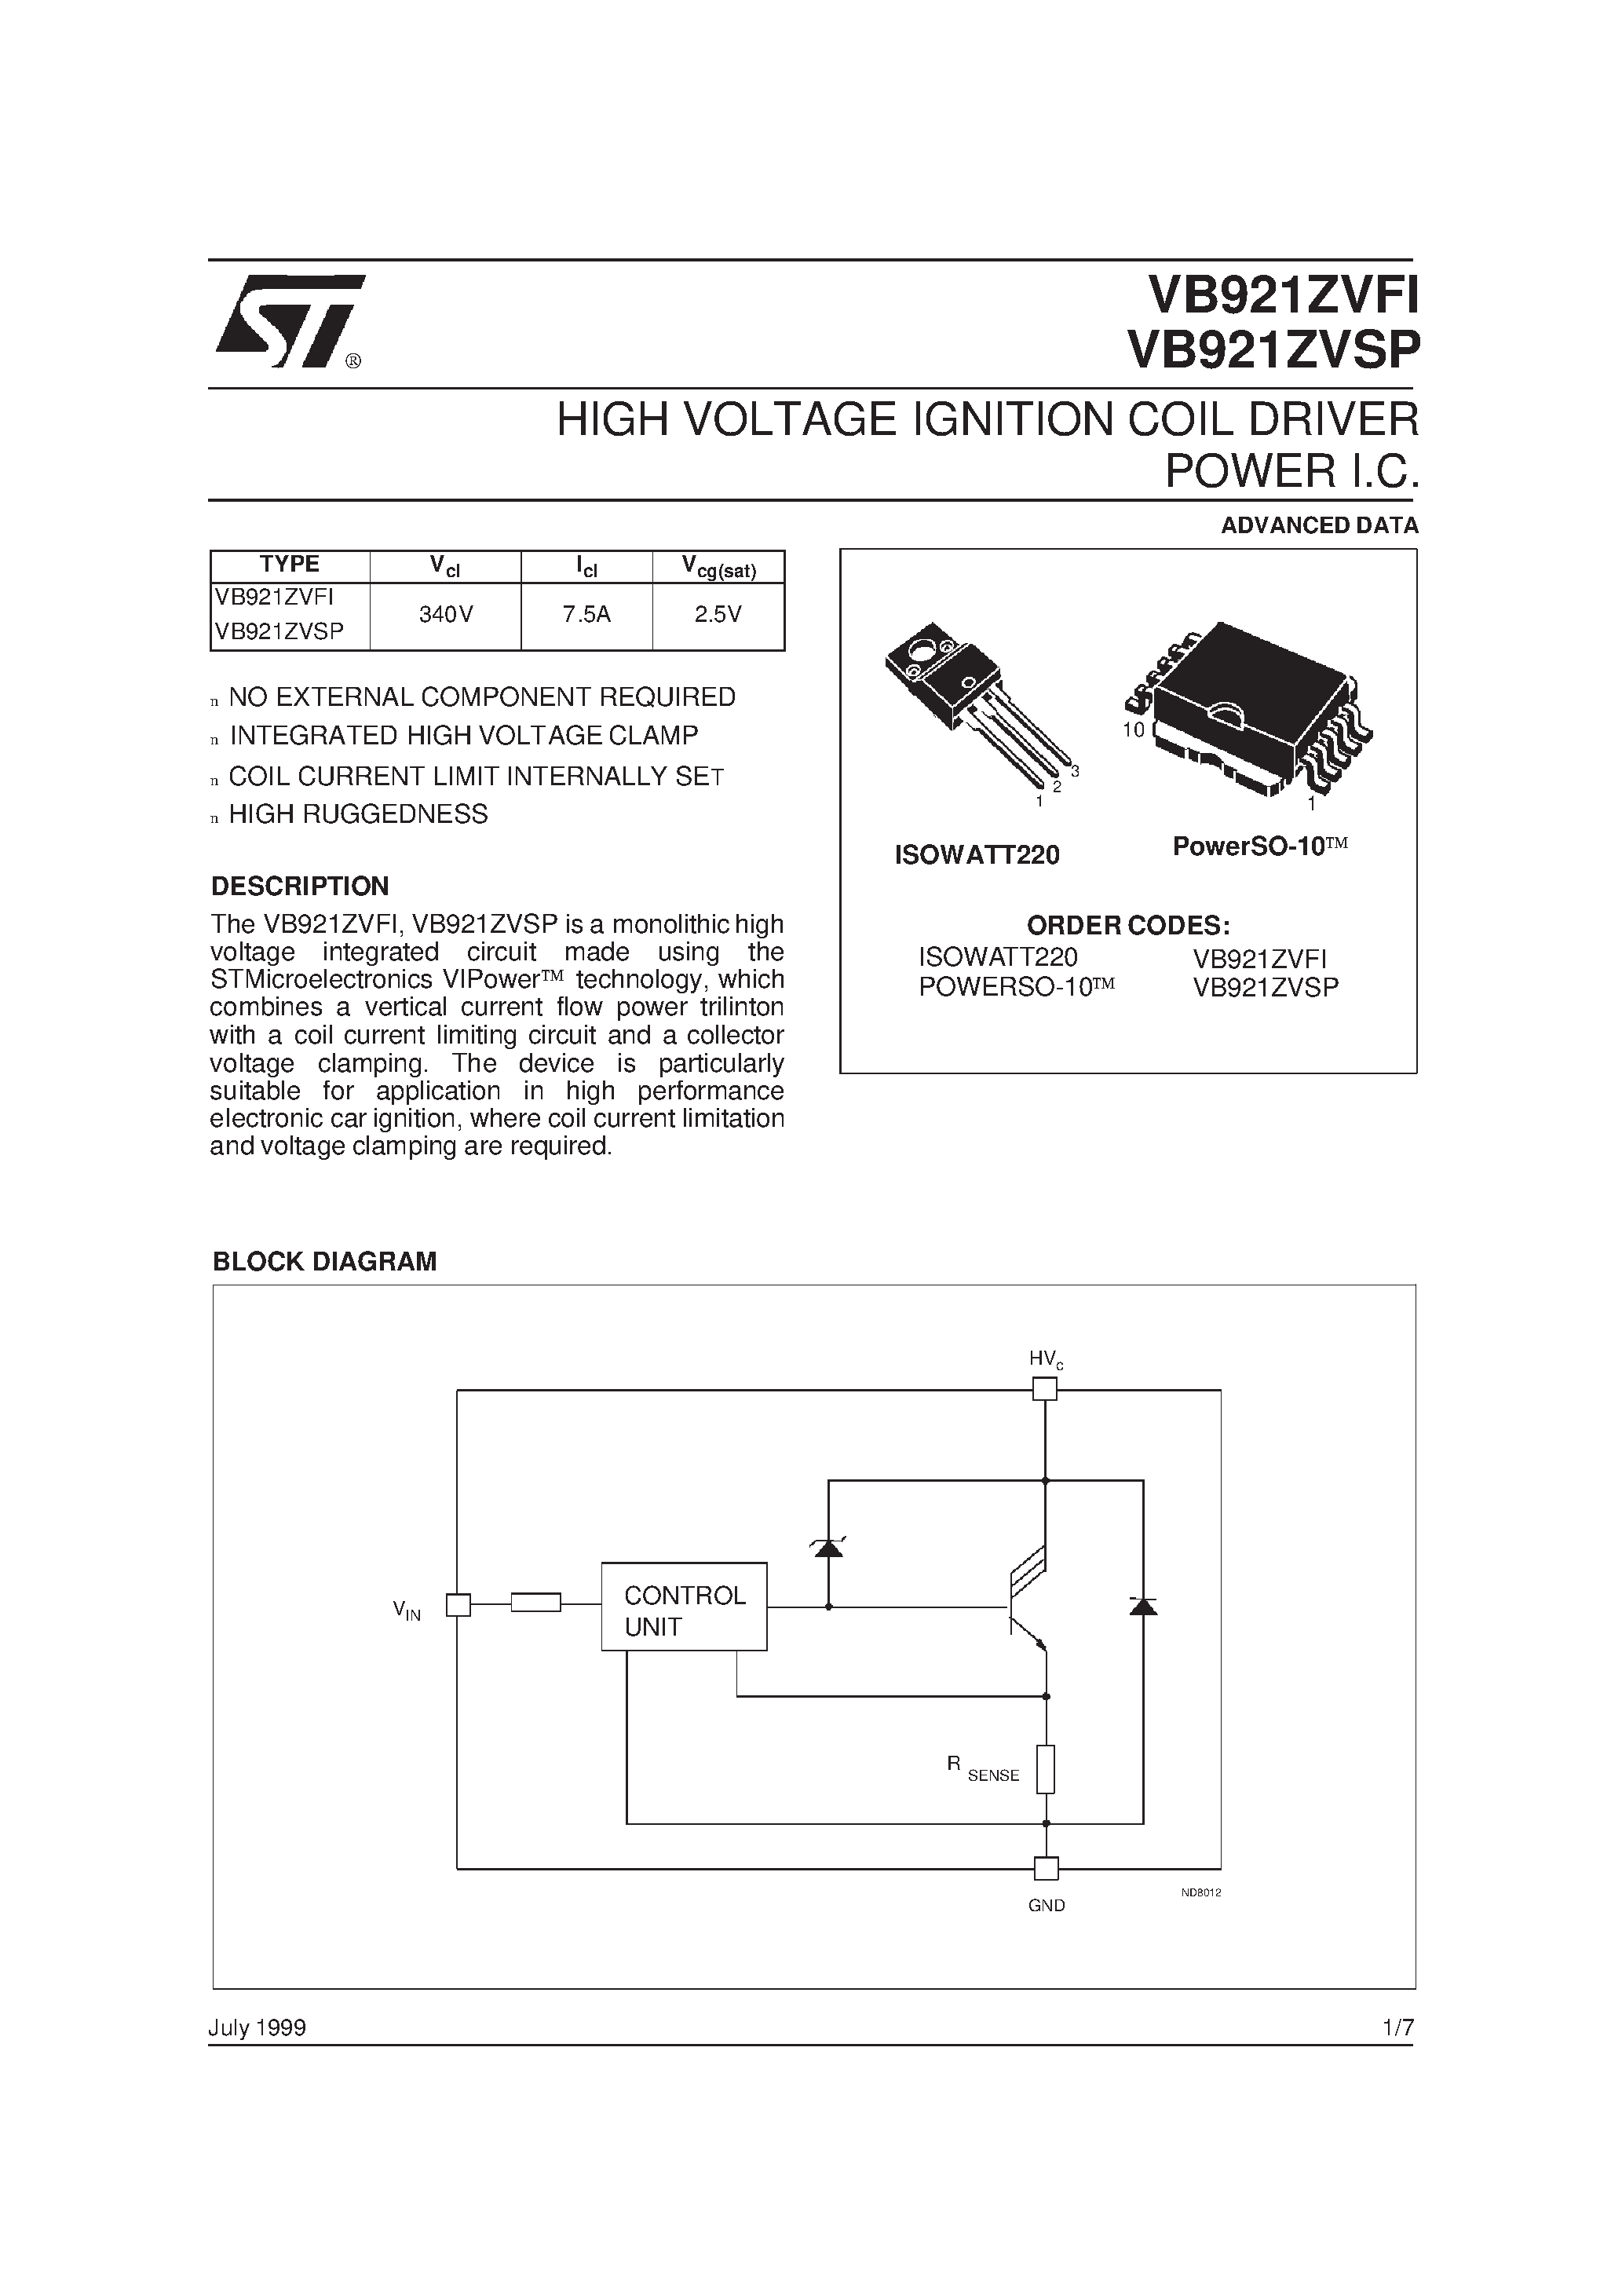 Даташит VB921ZVFI - HIGH VOLTAGE IGNITION COIL DRIVER POWER I.C. страница 1